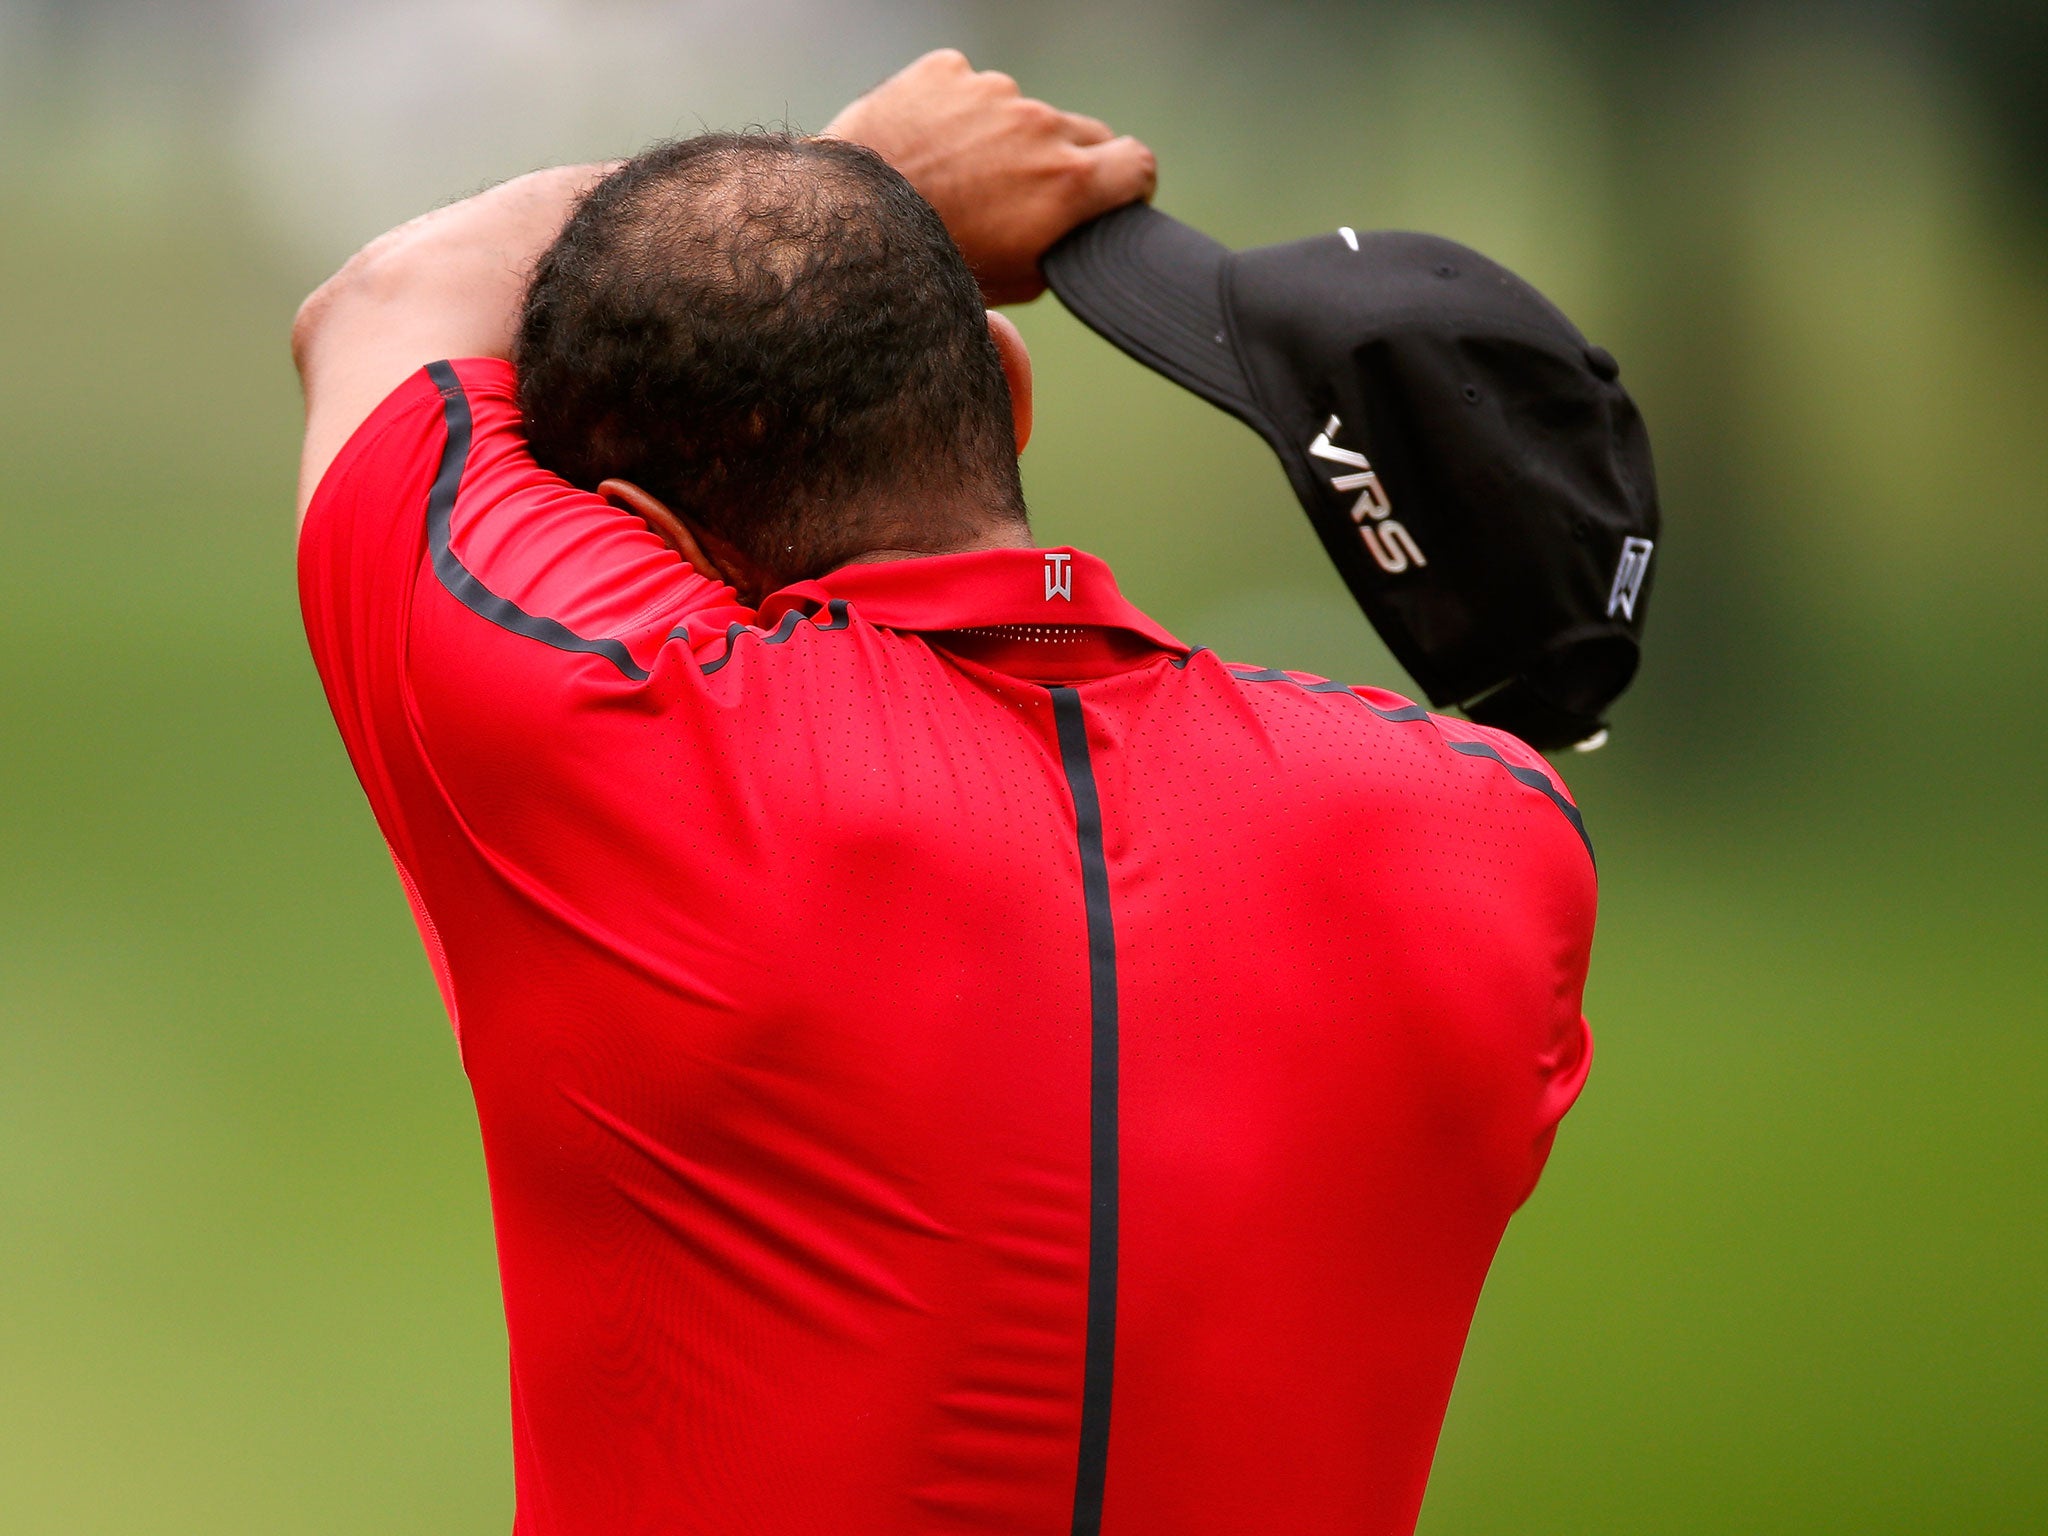 Tiger Woods reacts before withdrawing from the Bridgestone Invitational